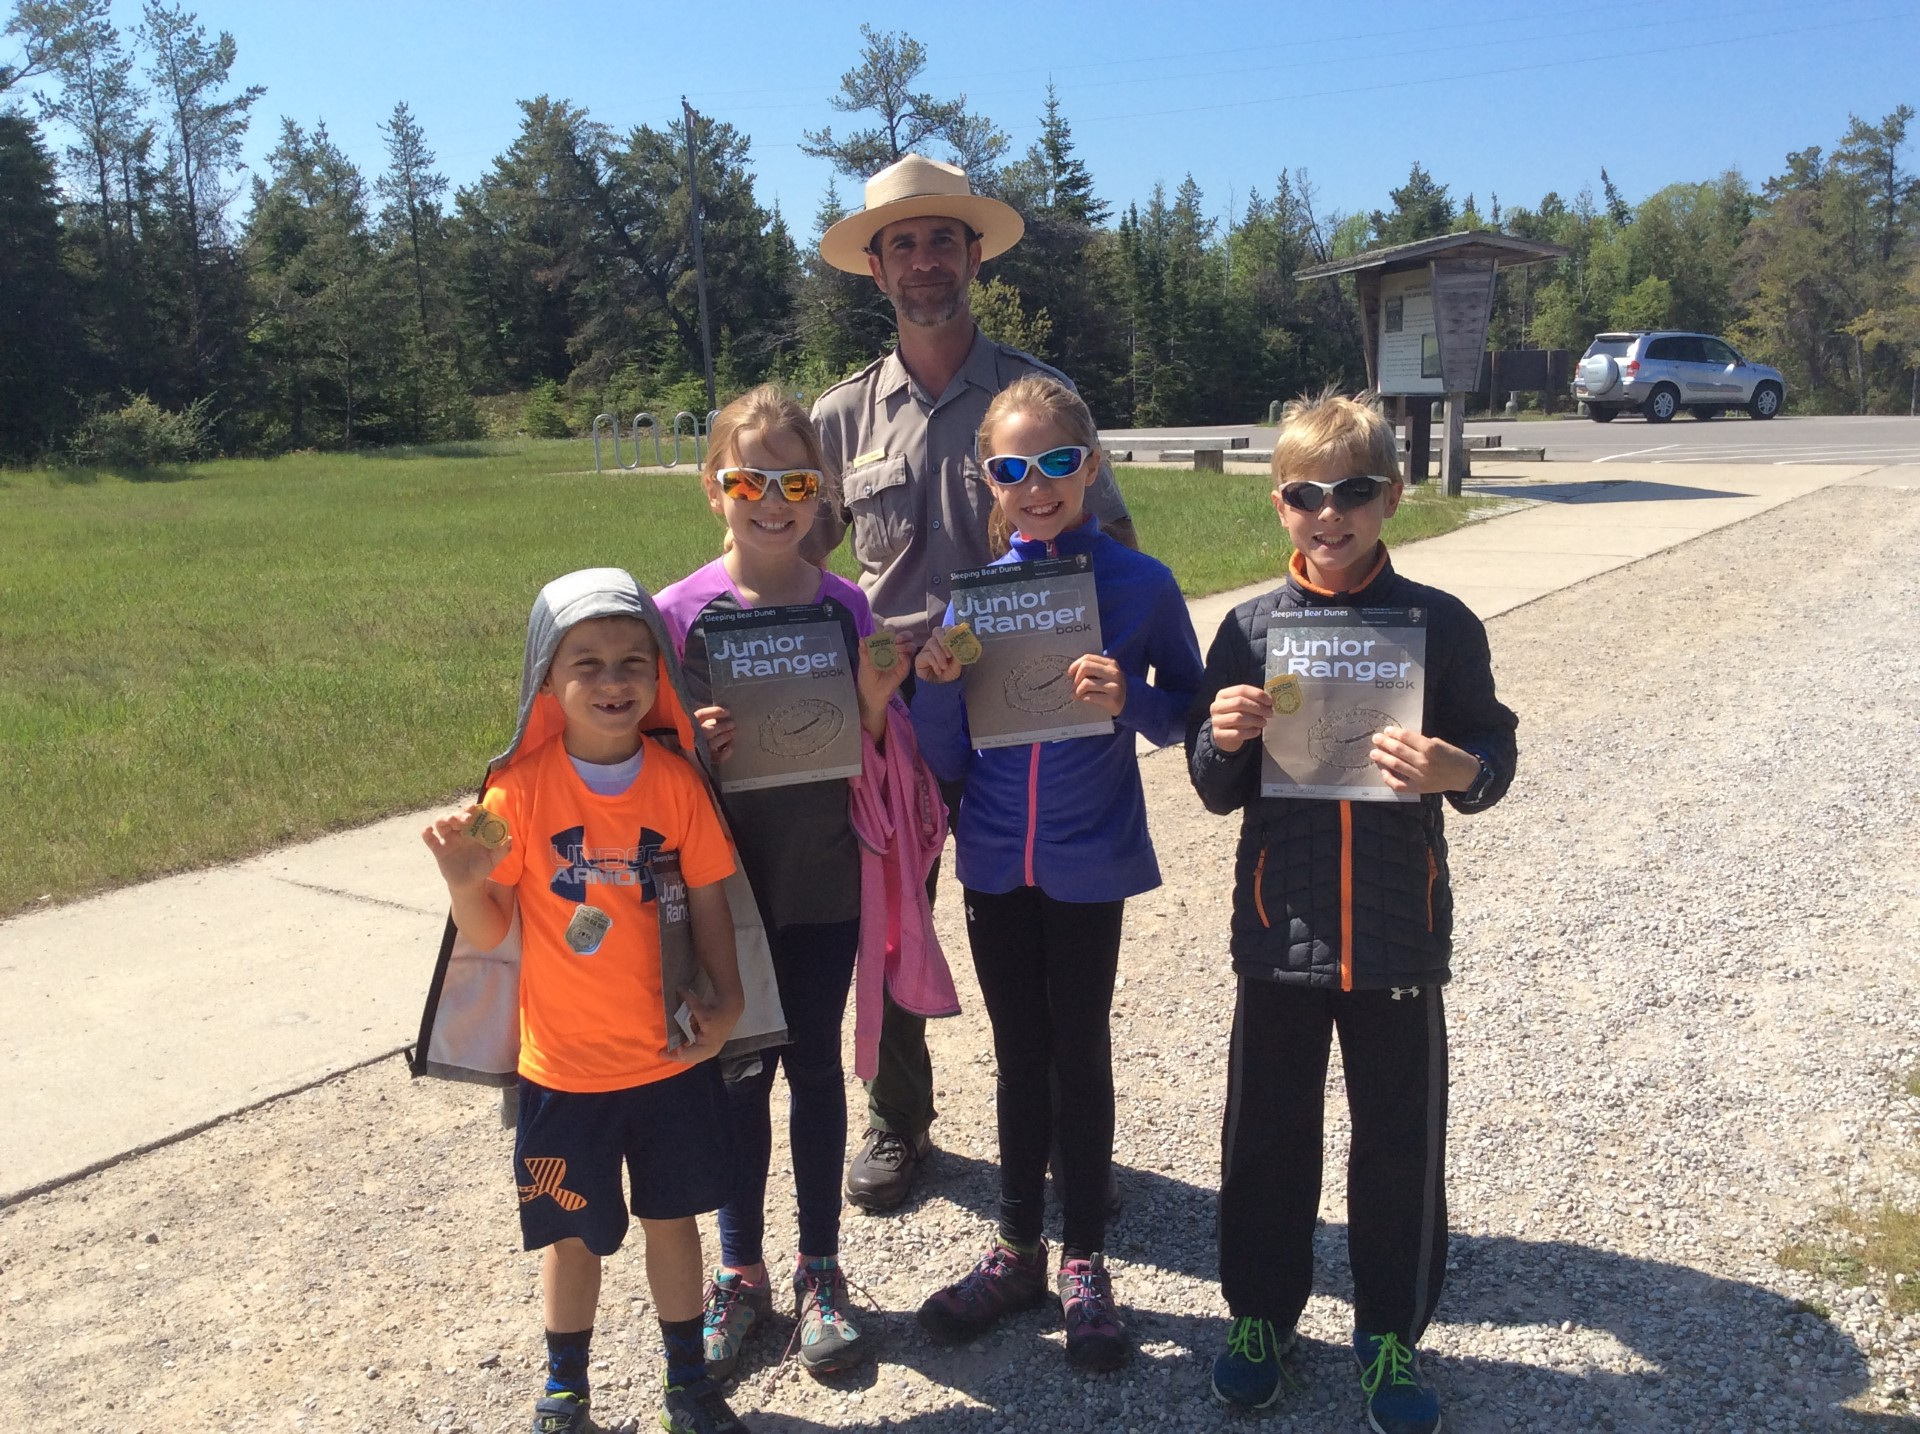 Four Junior Rangers smile and hold their badges and completed books up in front of a smiling park ranger.